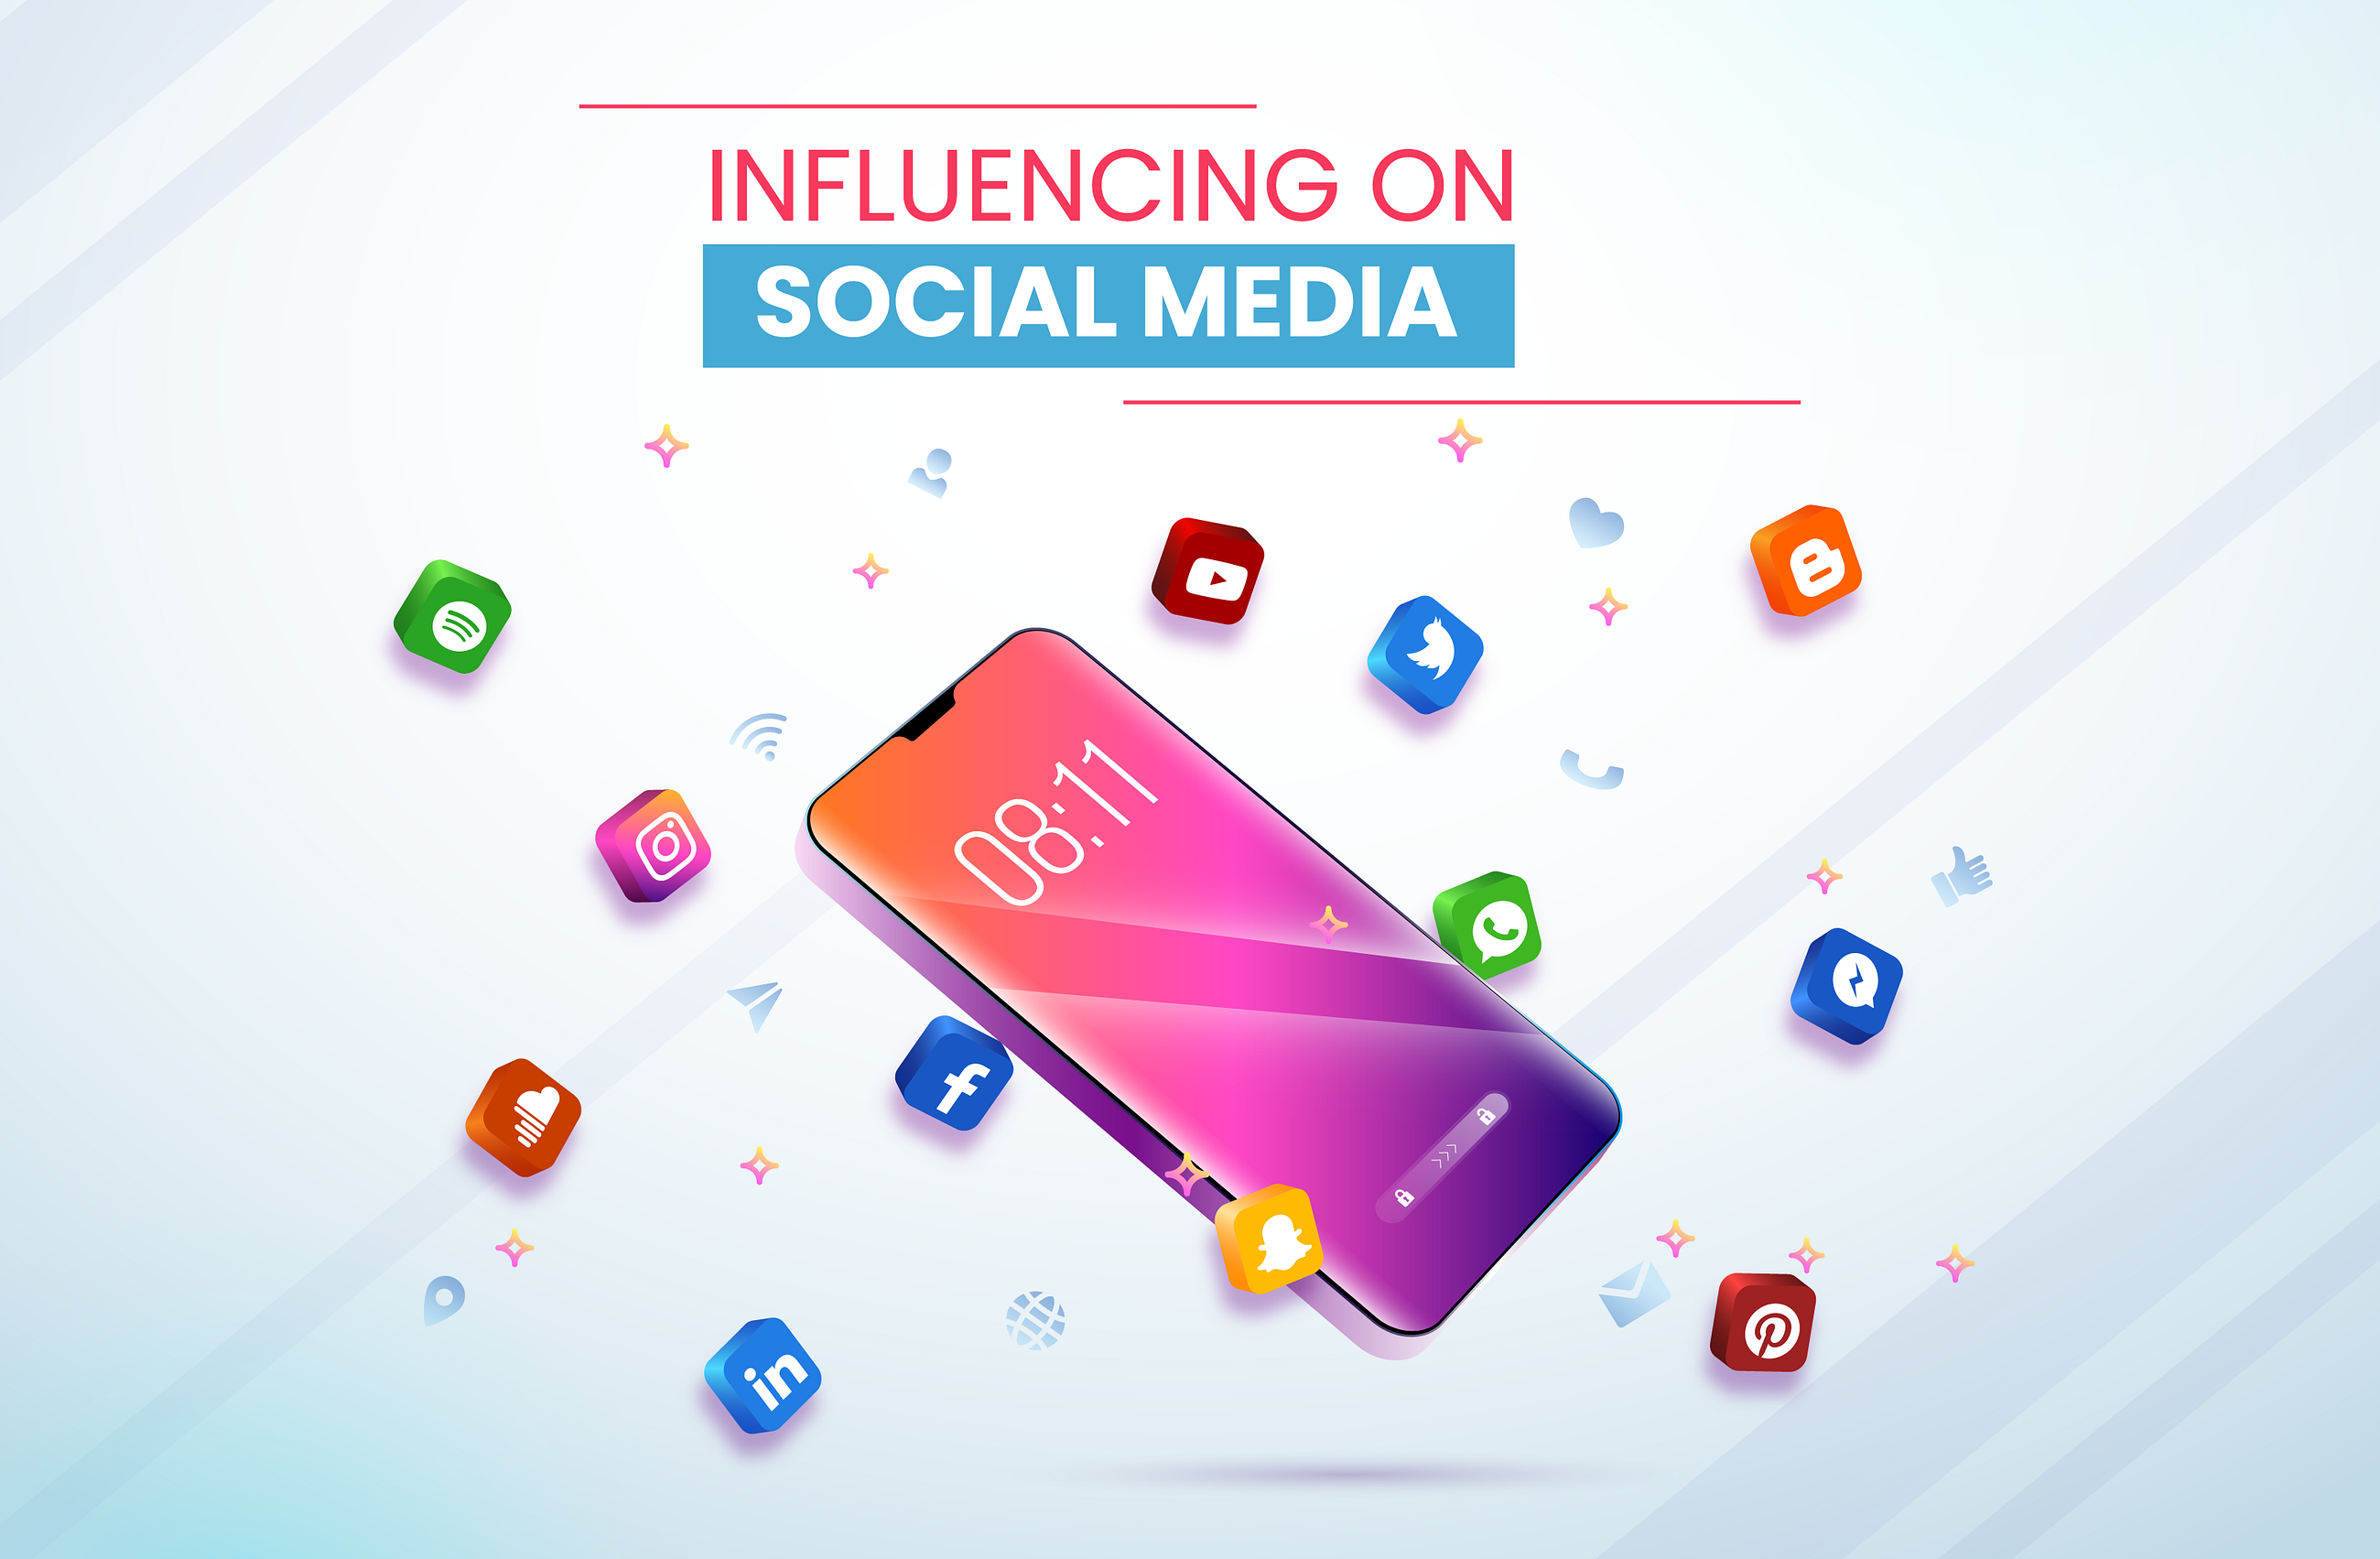 How Influencing is the Influencer Marketing?